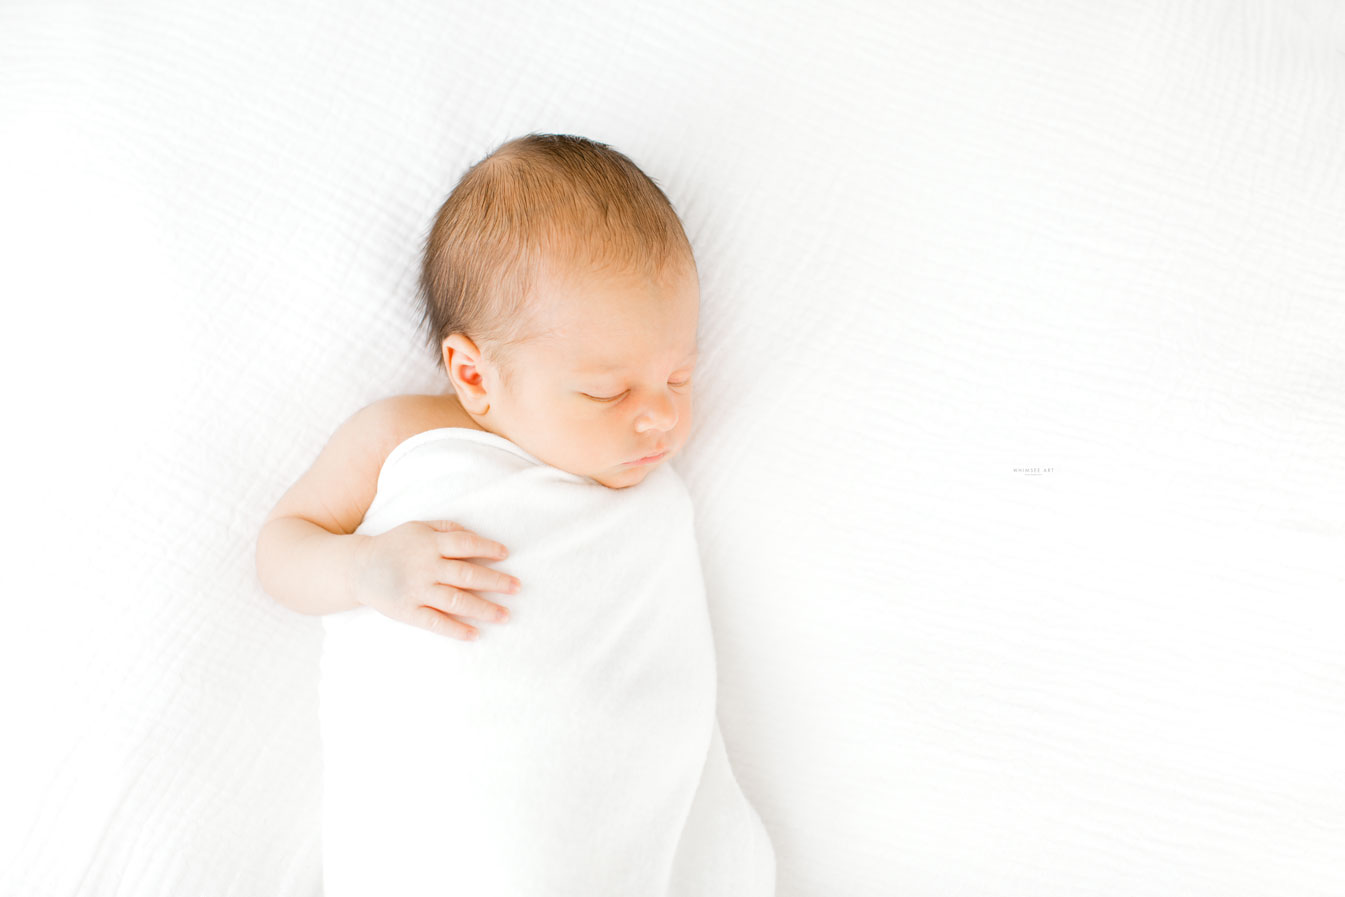 Welcoming Baby Liam and Family | Newborn Session | Whimsee Art Photography